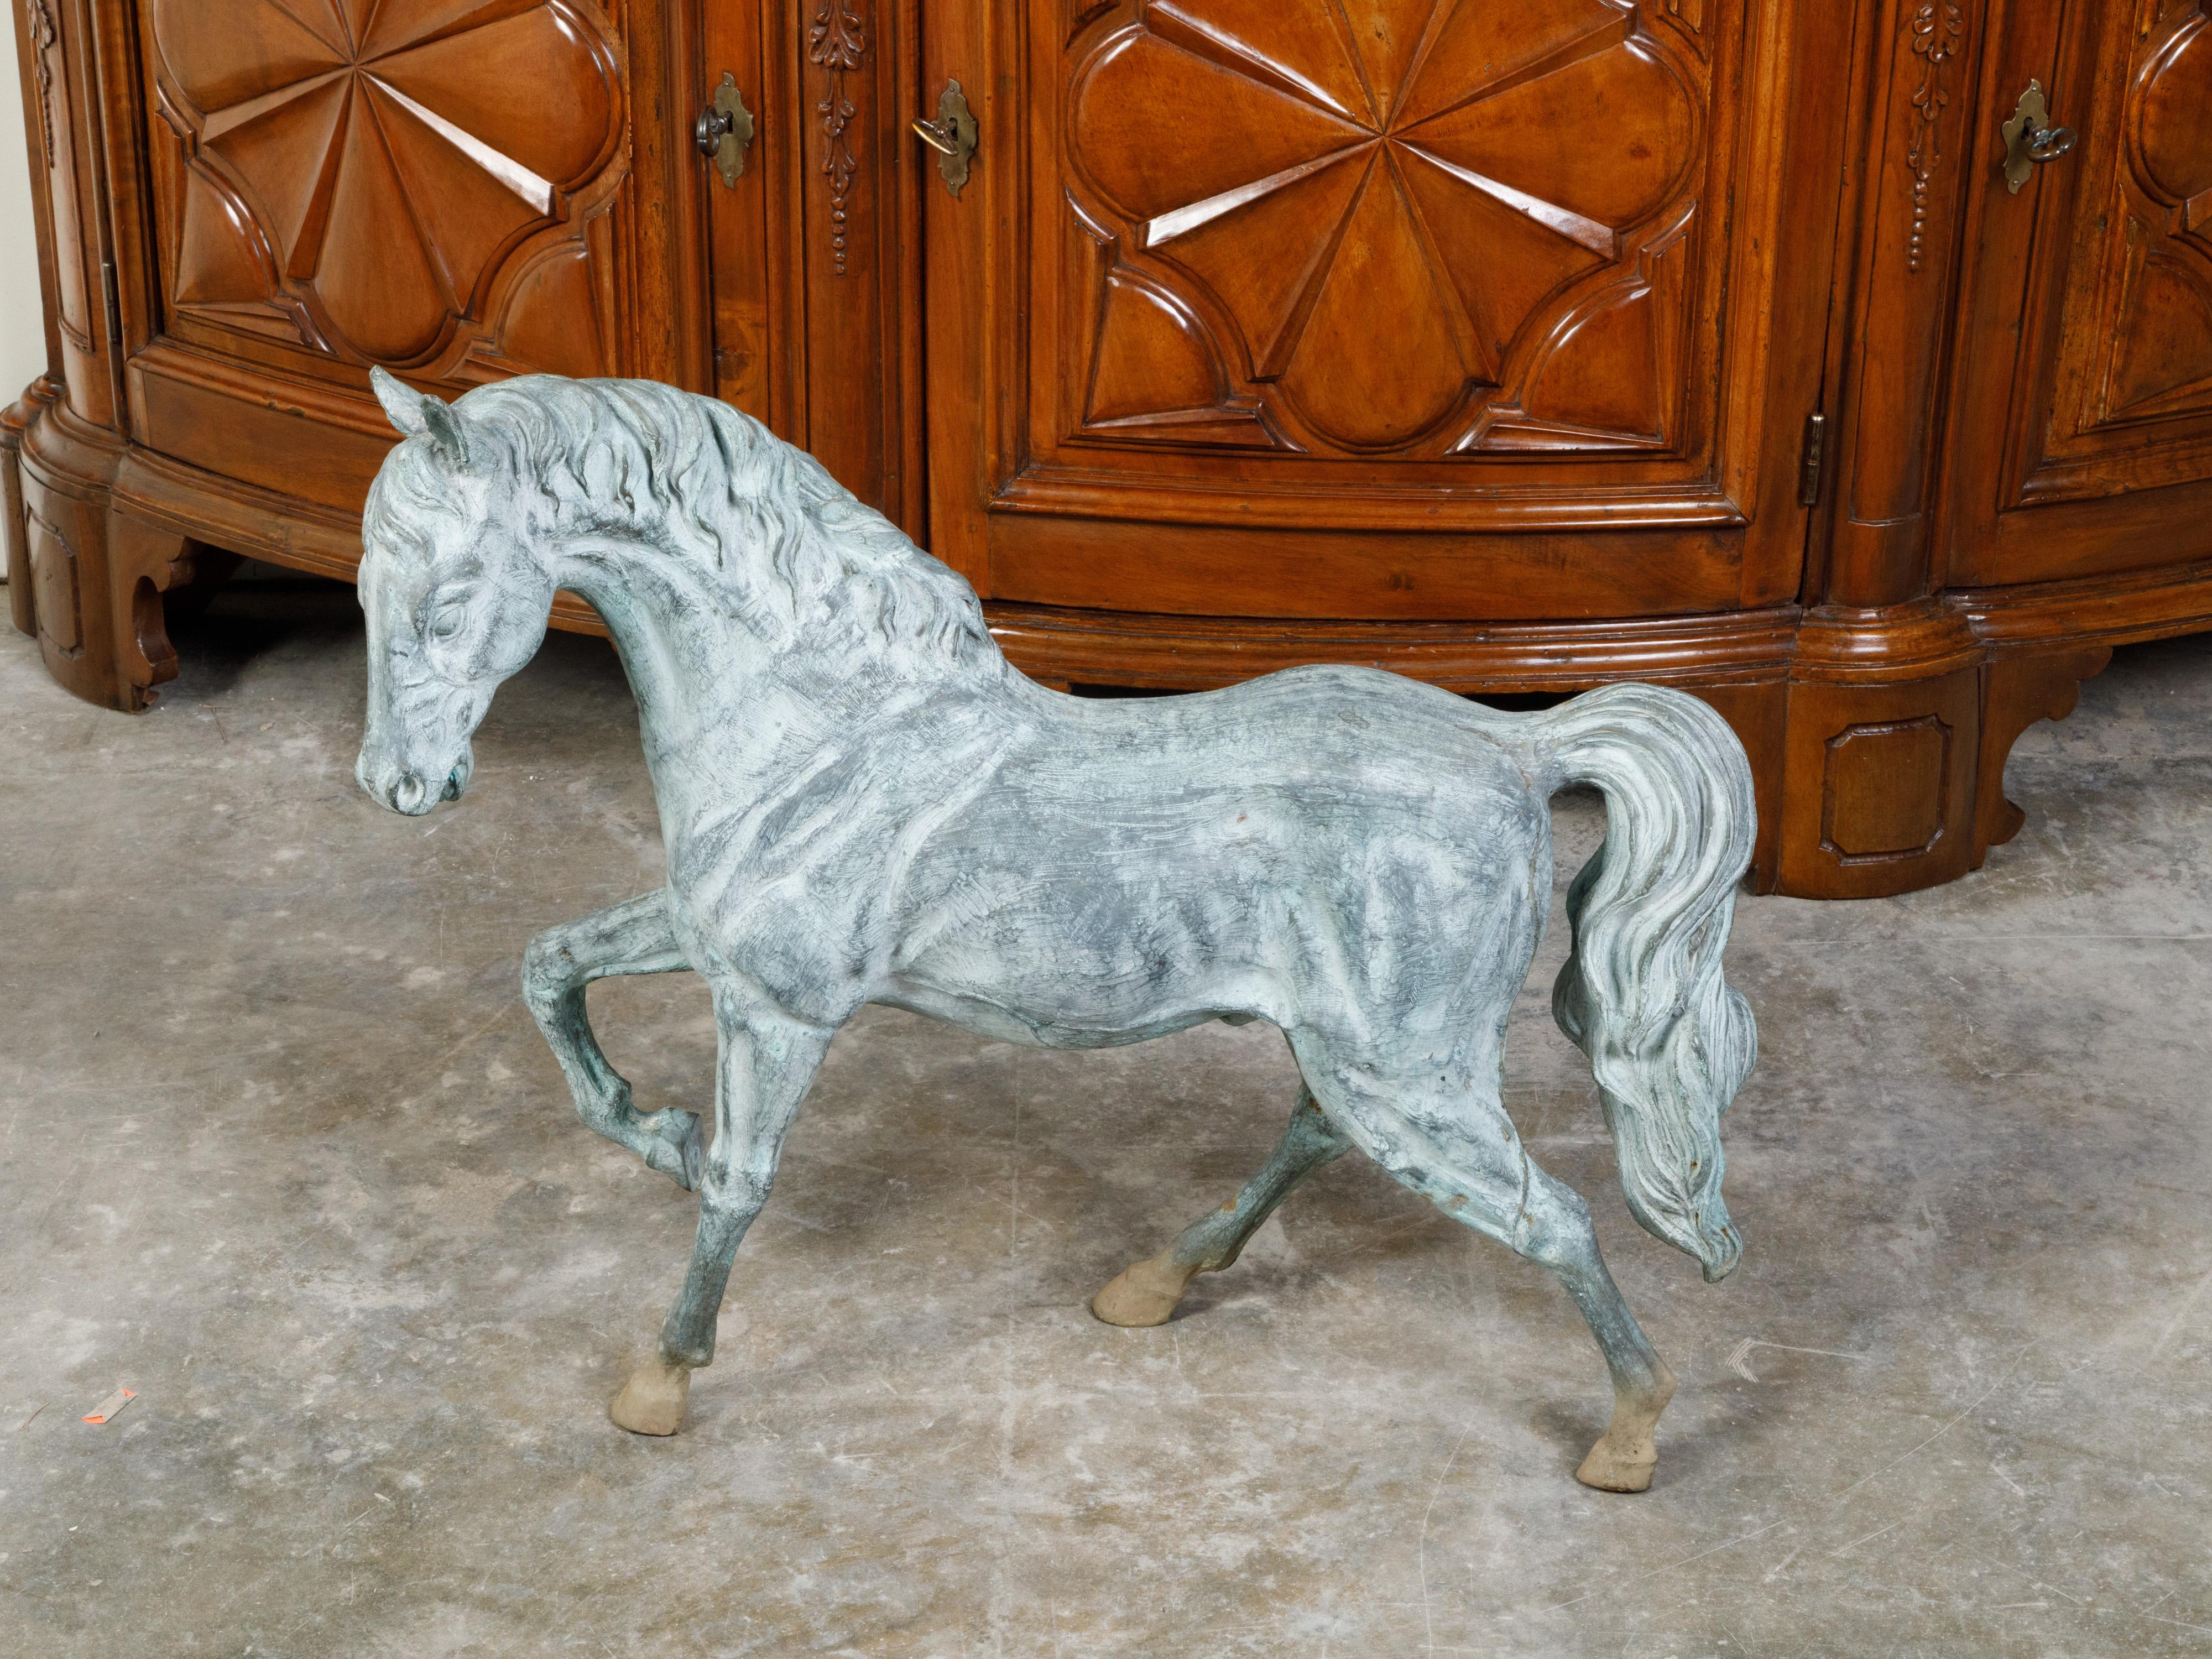 A French bronze horse statue from the mid 20th century, with great details and patina. Created in France during the Midcentury period, this bronze statue depicts an elegant horse with its front right hoof raised. Showcasing a great finesse in the